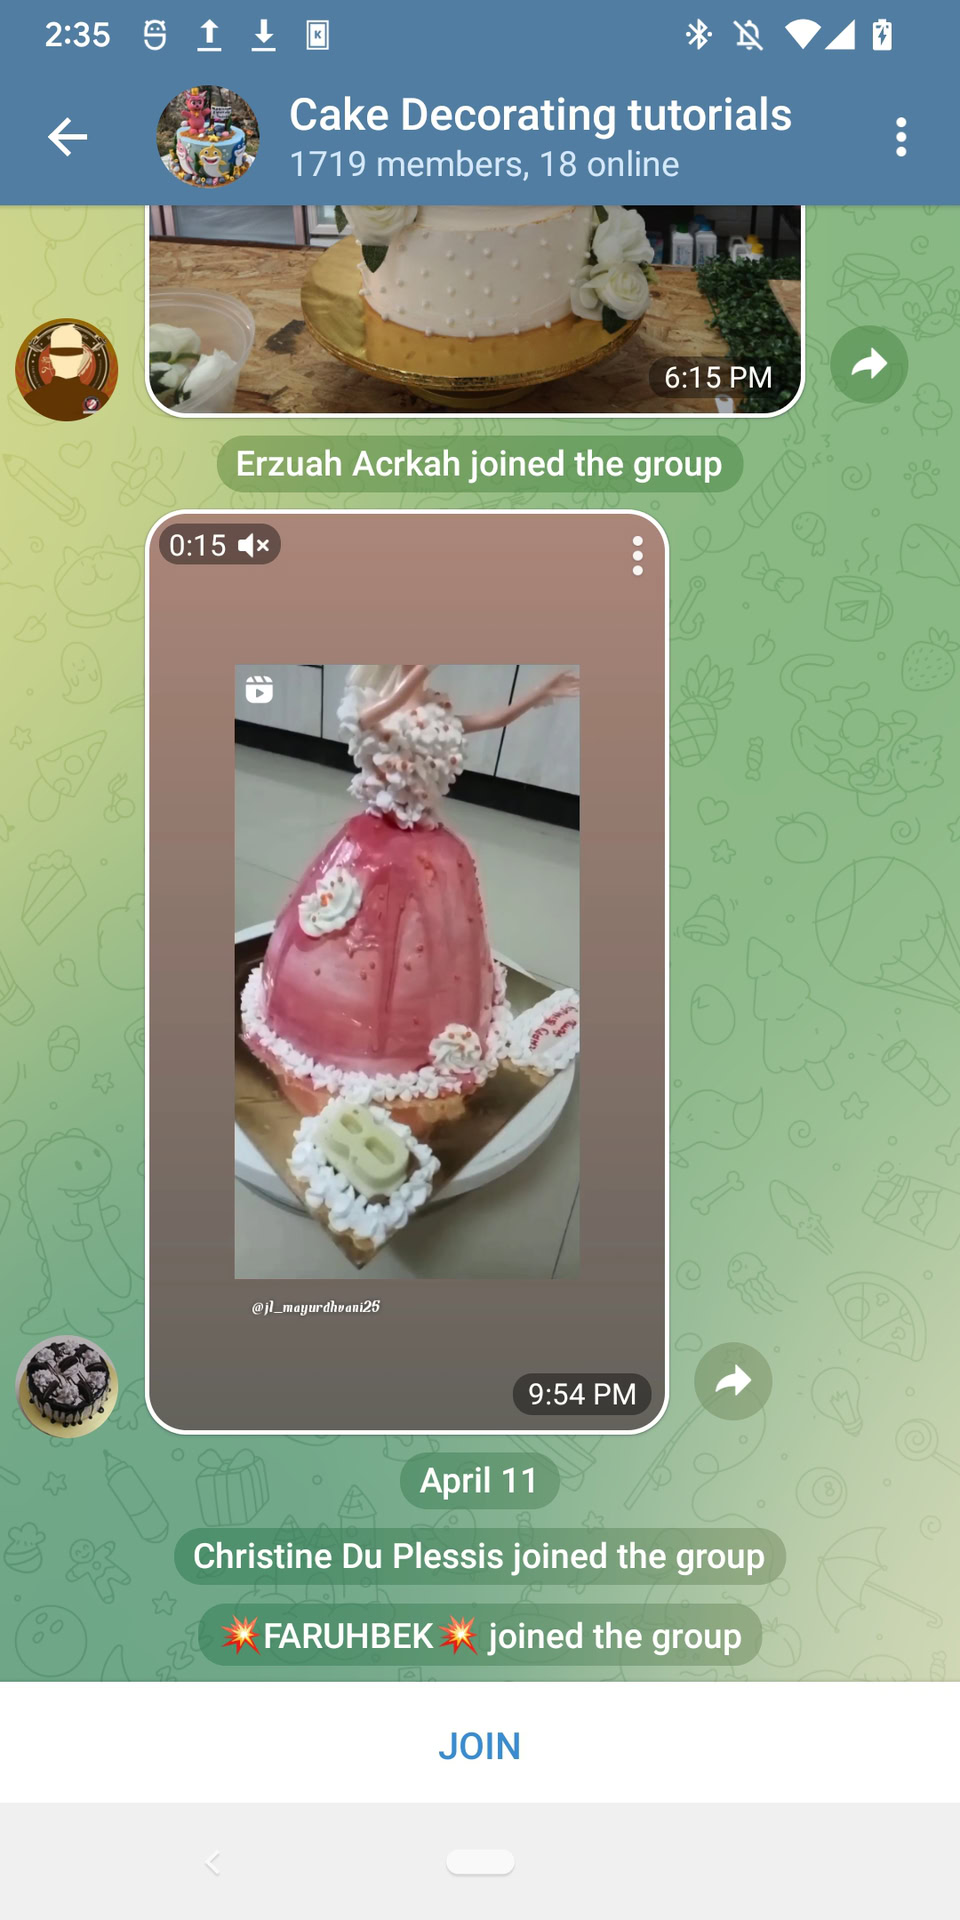 A public Telegram group called 'Cake Decorating tutorials' with messages visible and a 'Join' button at the bottom.